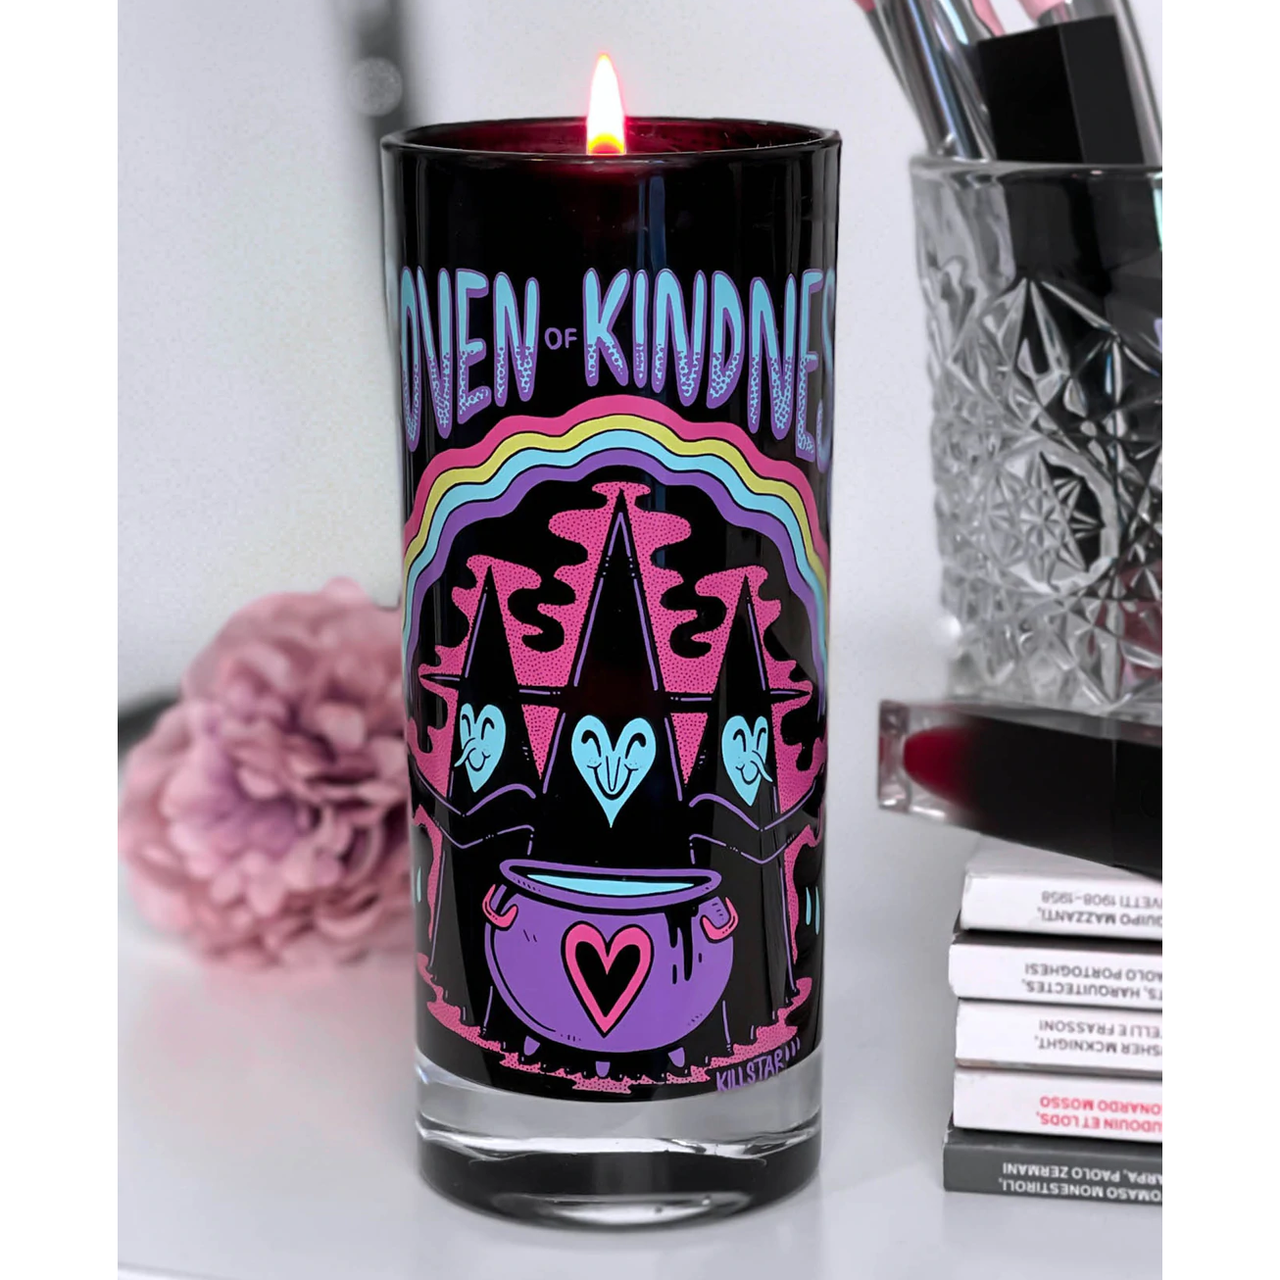 KILLSTAR COVEN OF KINDNESS CANDLE